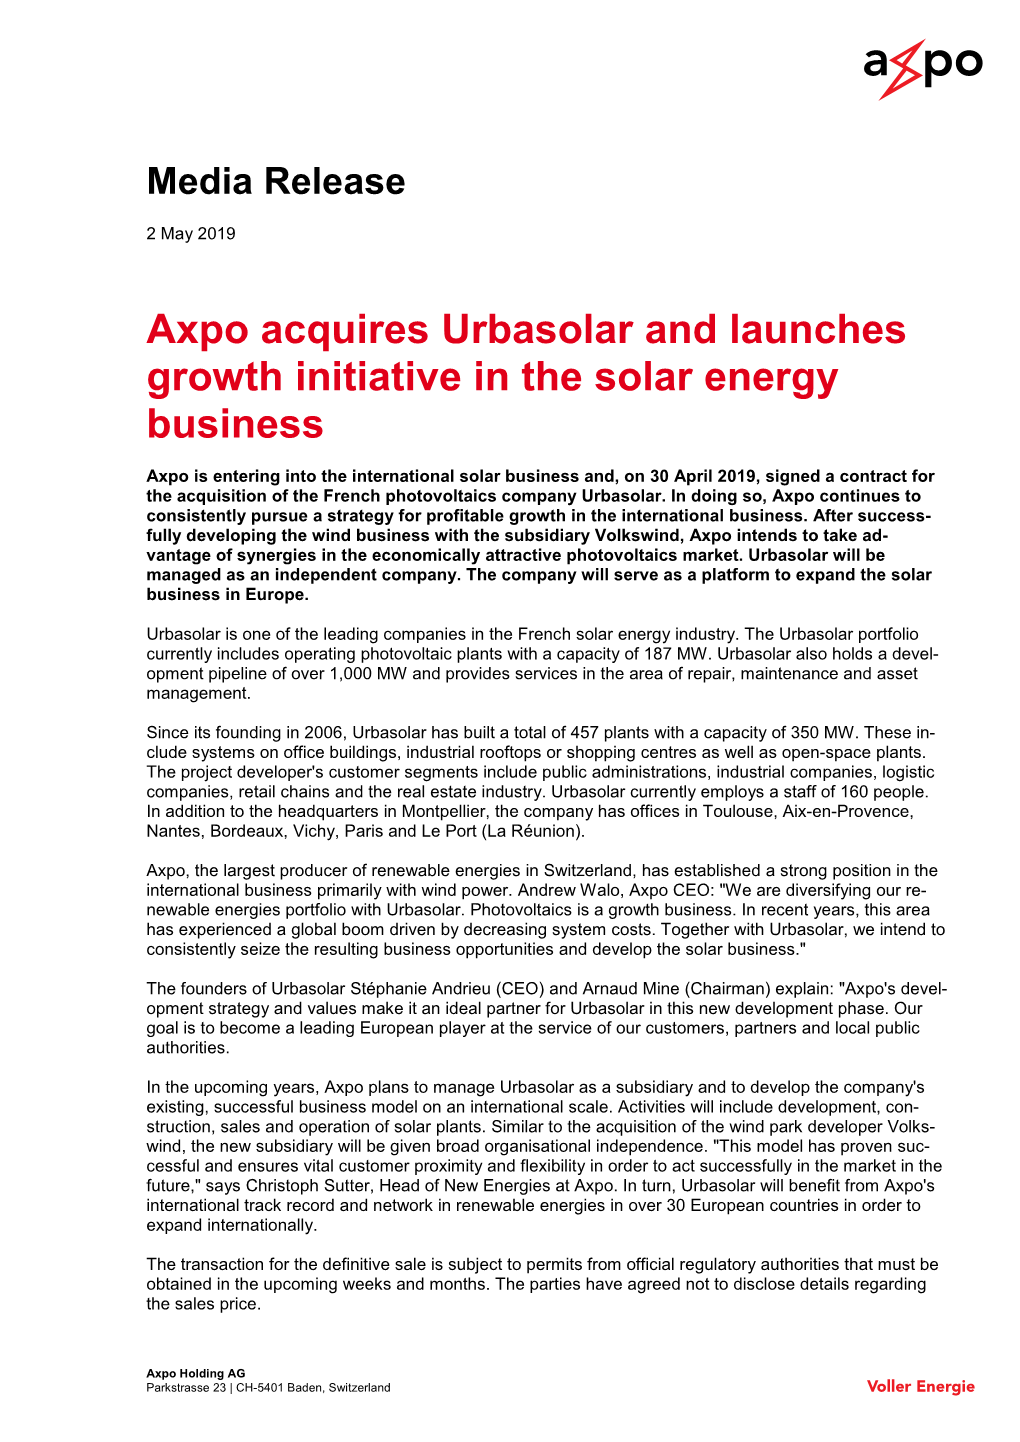 Axpo Acquires Urbasolar and Launches Growth Initiative in the Solar Energy Business